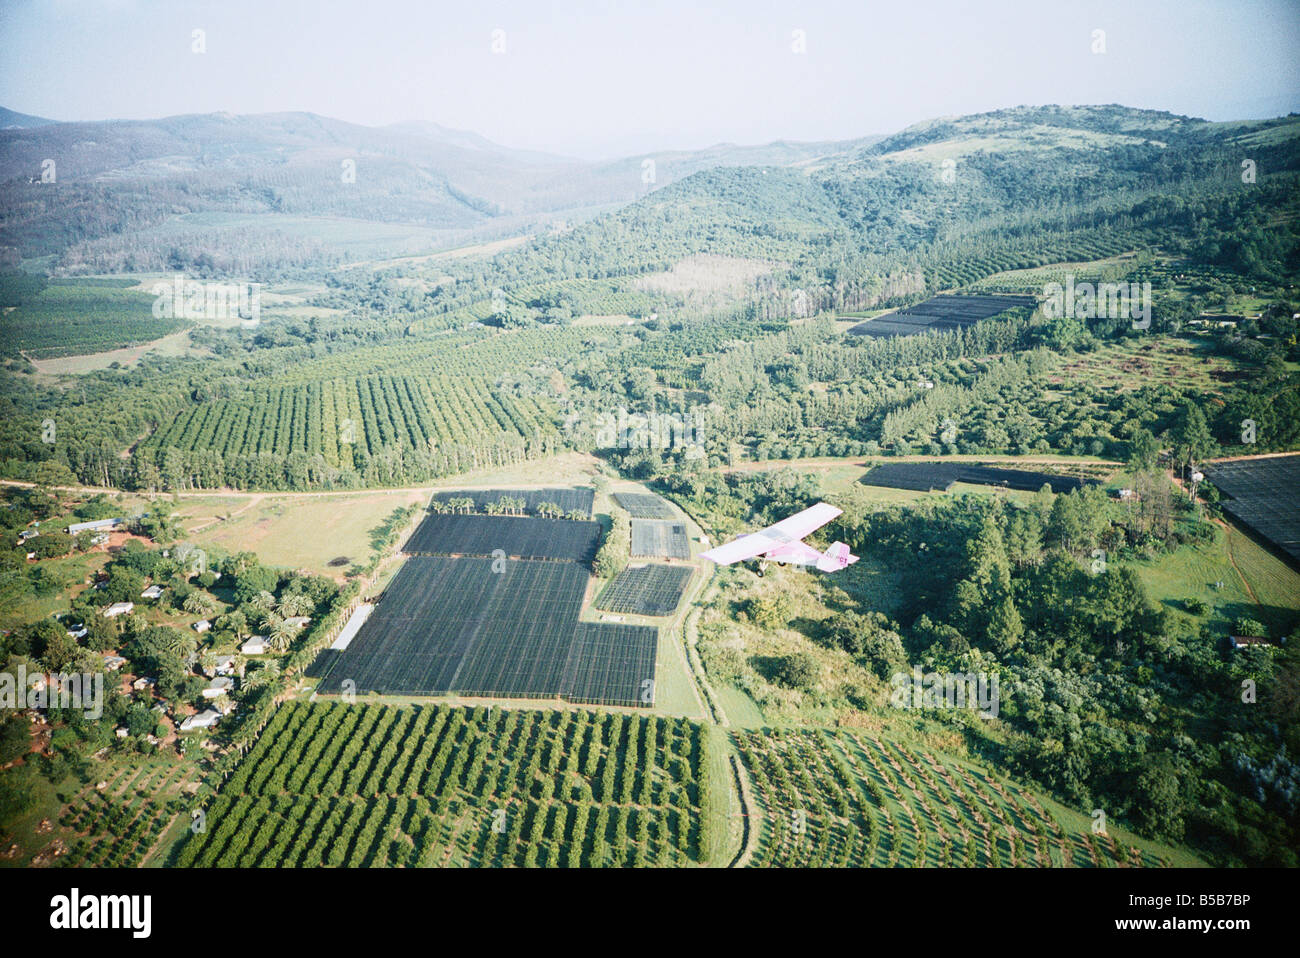 South Africa, Mpumalanga, Nelspruit, Microlights in air with green landscape in background, aerial view Stock Photo